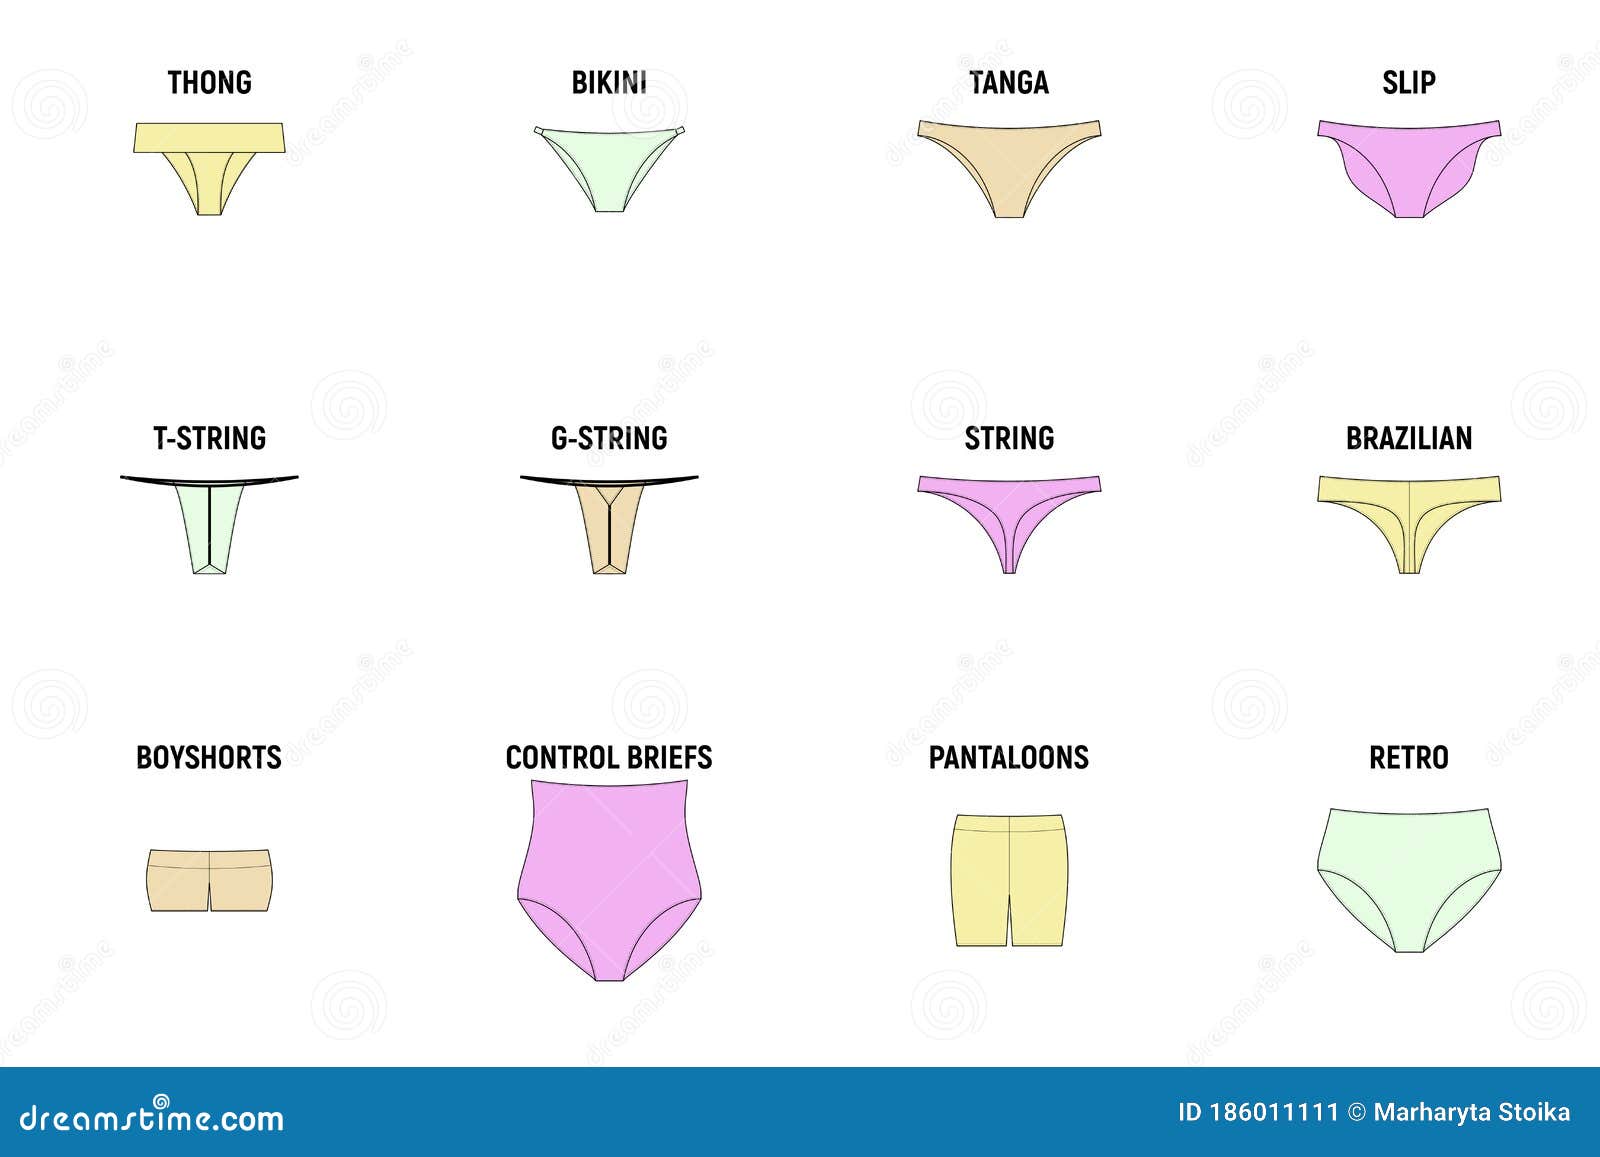 Types of panties for women stock vector. Illustration of